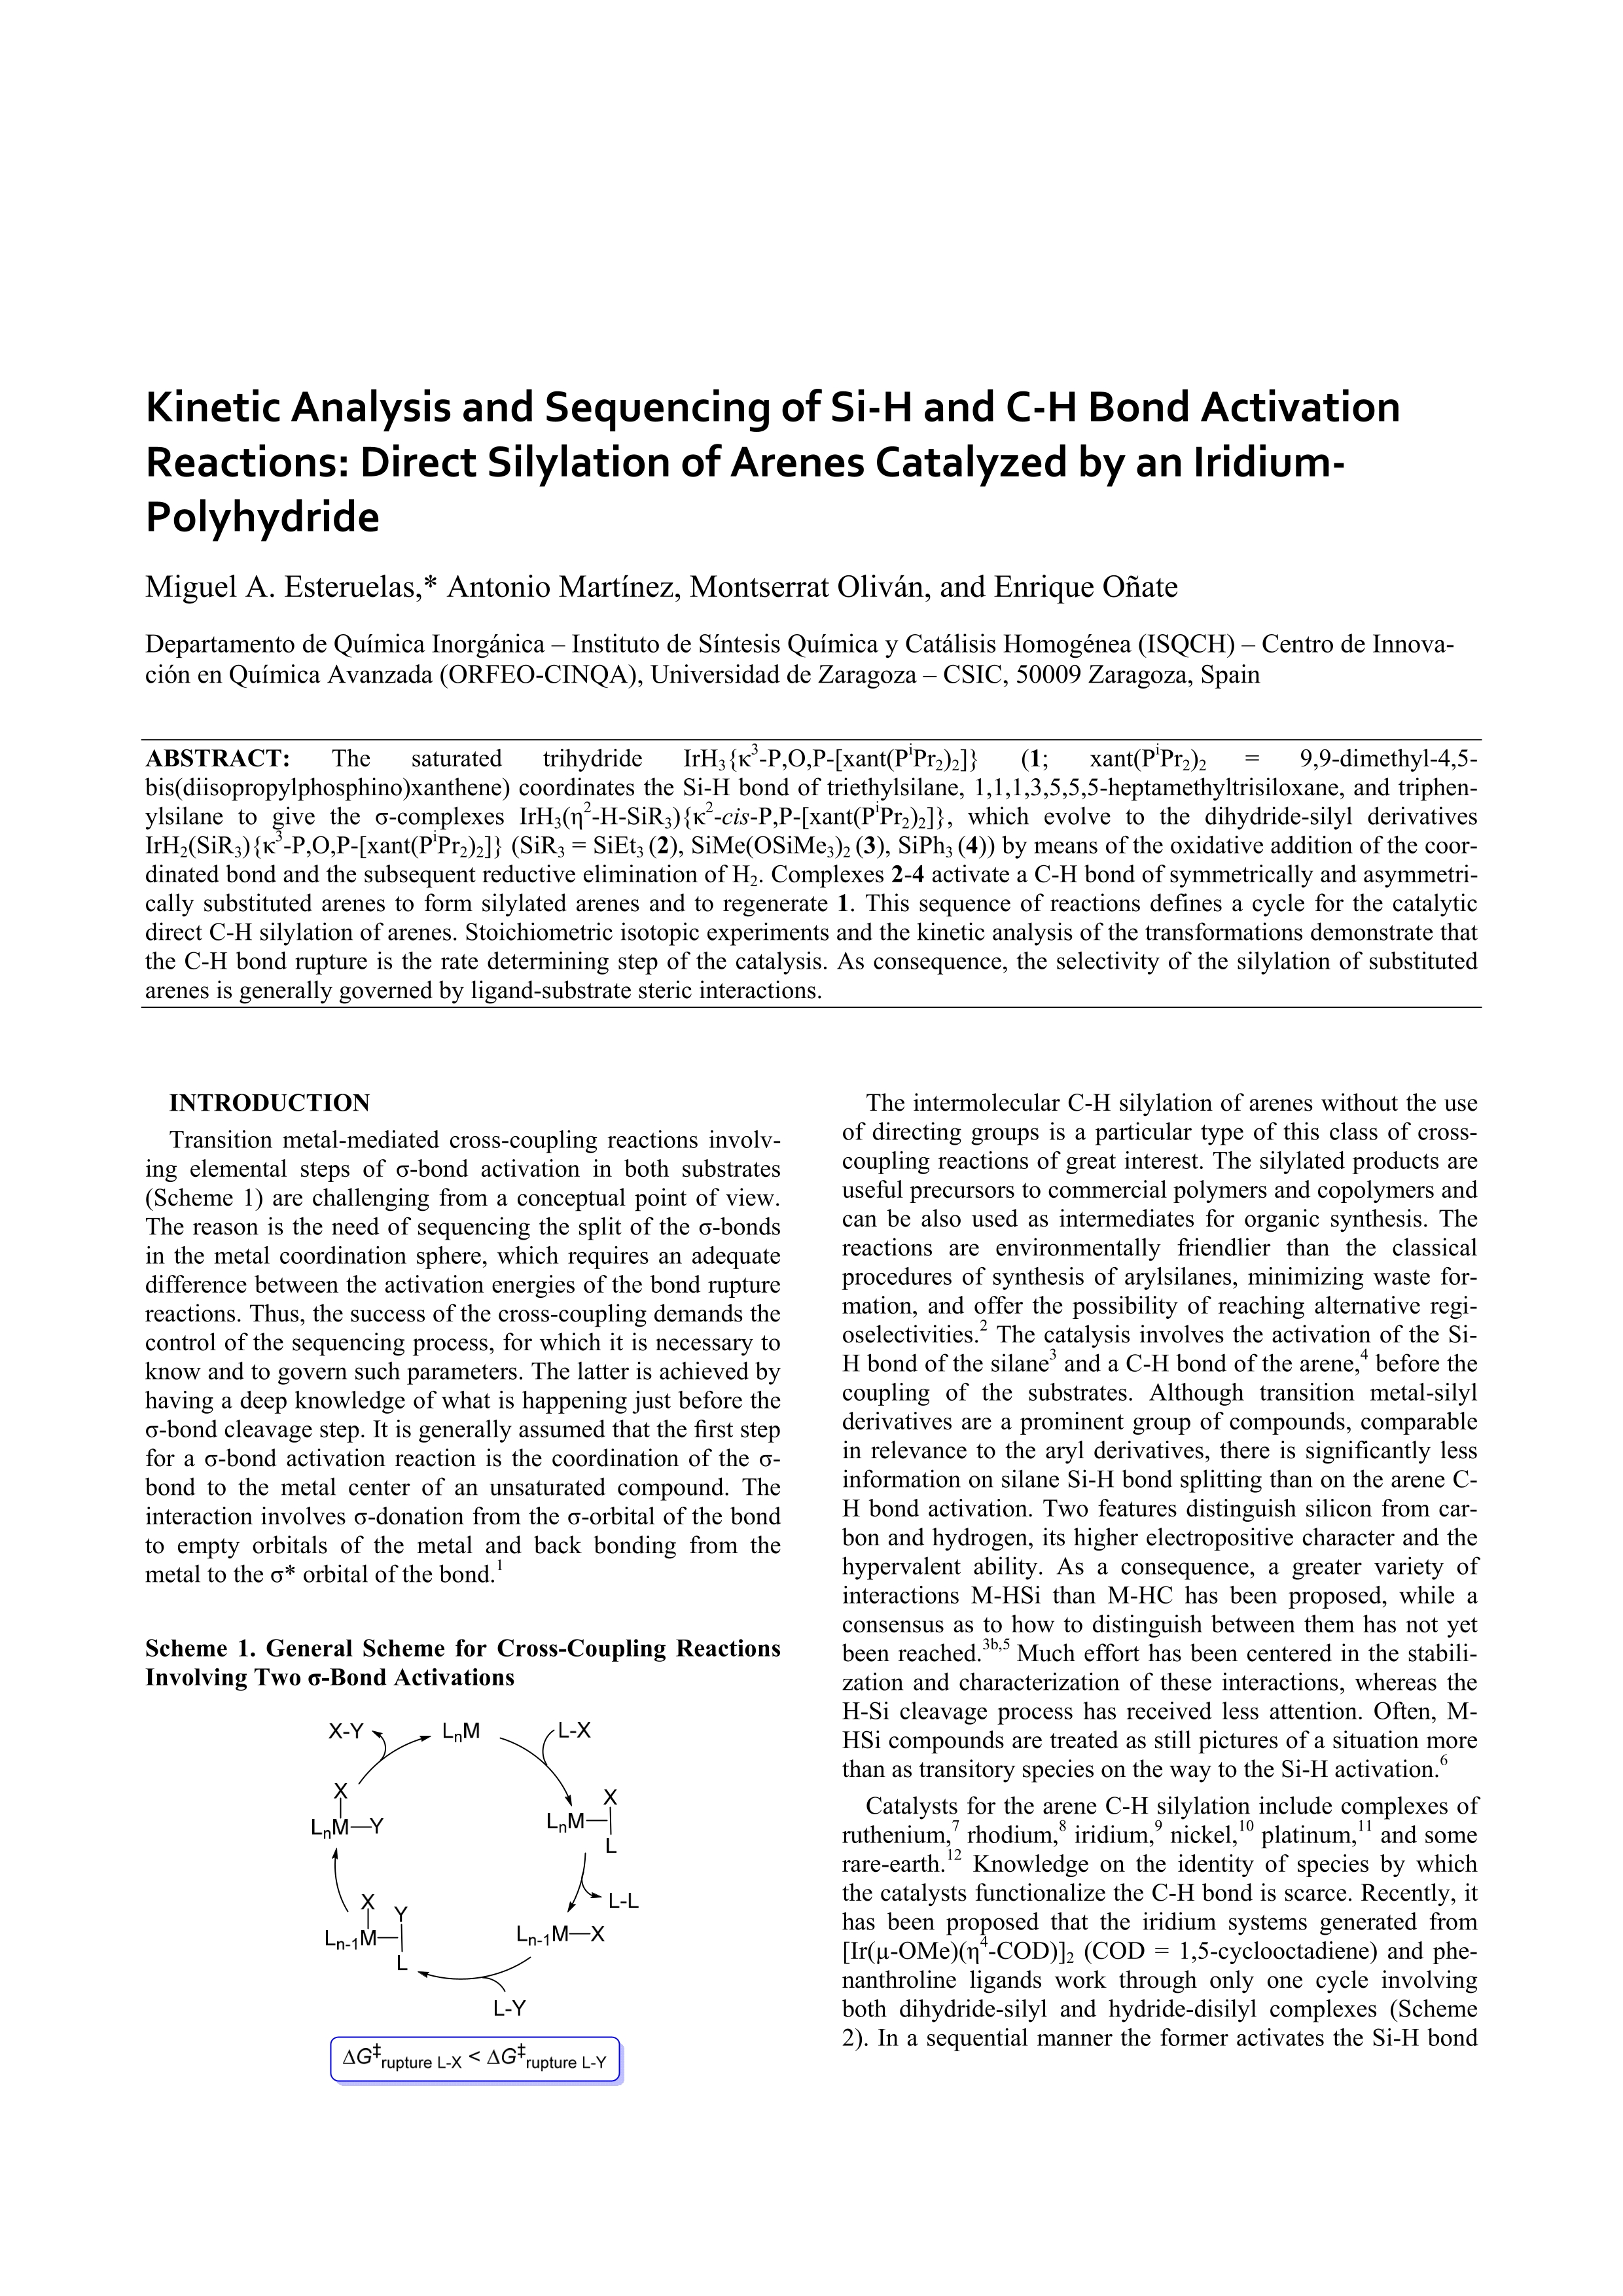 Kinetic Analysis and Sequencing of Si-H and C-H Bond Activation Reactions: Direct Silylation of Arenes Catalyzed by an Iridium-Polyhydride